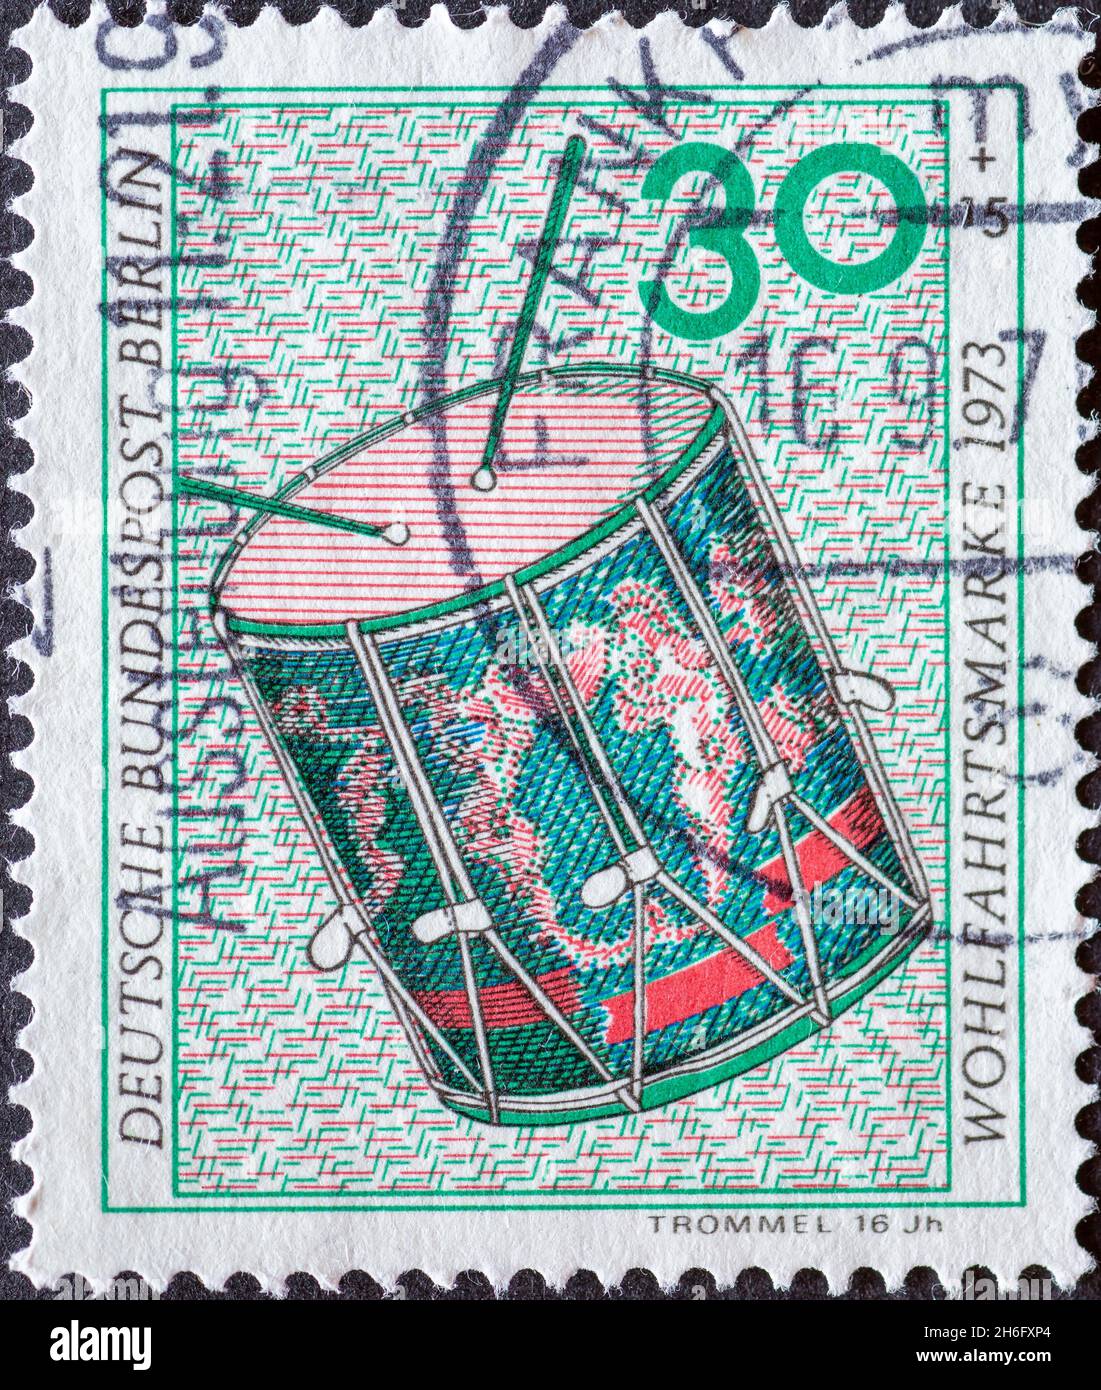 GERMANY, Berlin - CIRCA 1973: a postage stamp from Germany, Berlin showing a charity postal stamp from 1973 musical instruments. Here drum Stock Photo